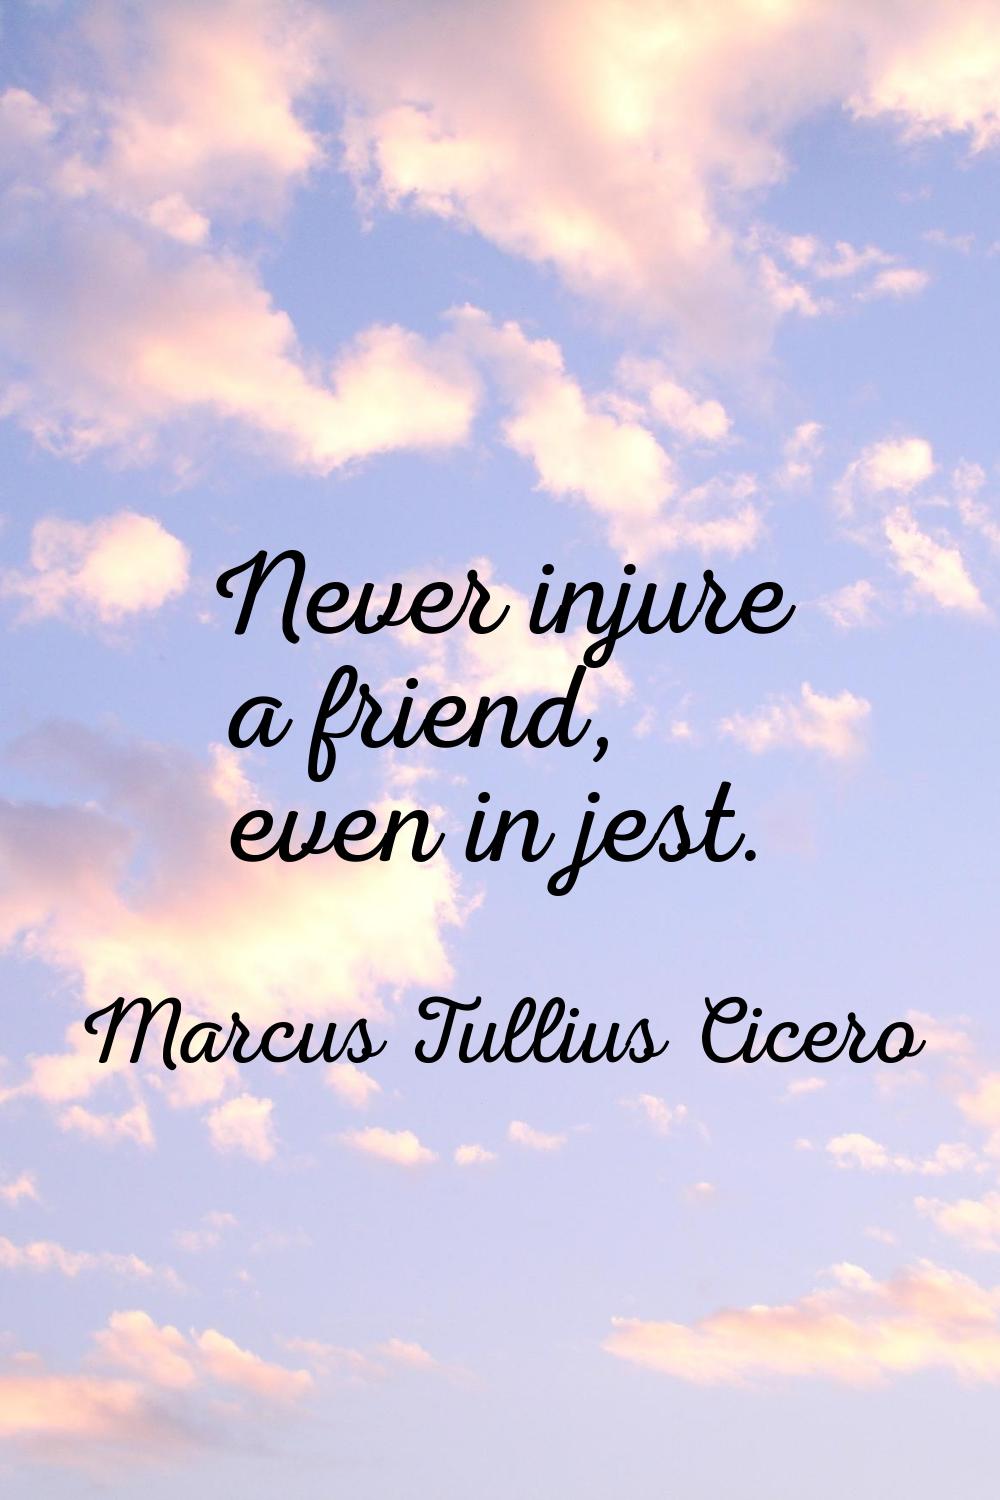 Never injure a friend, even in jest.